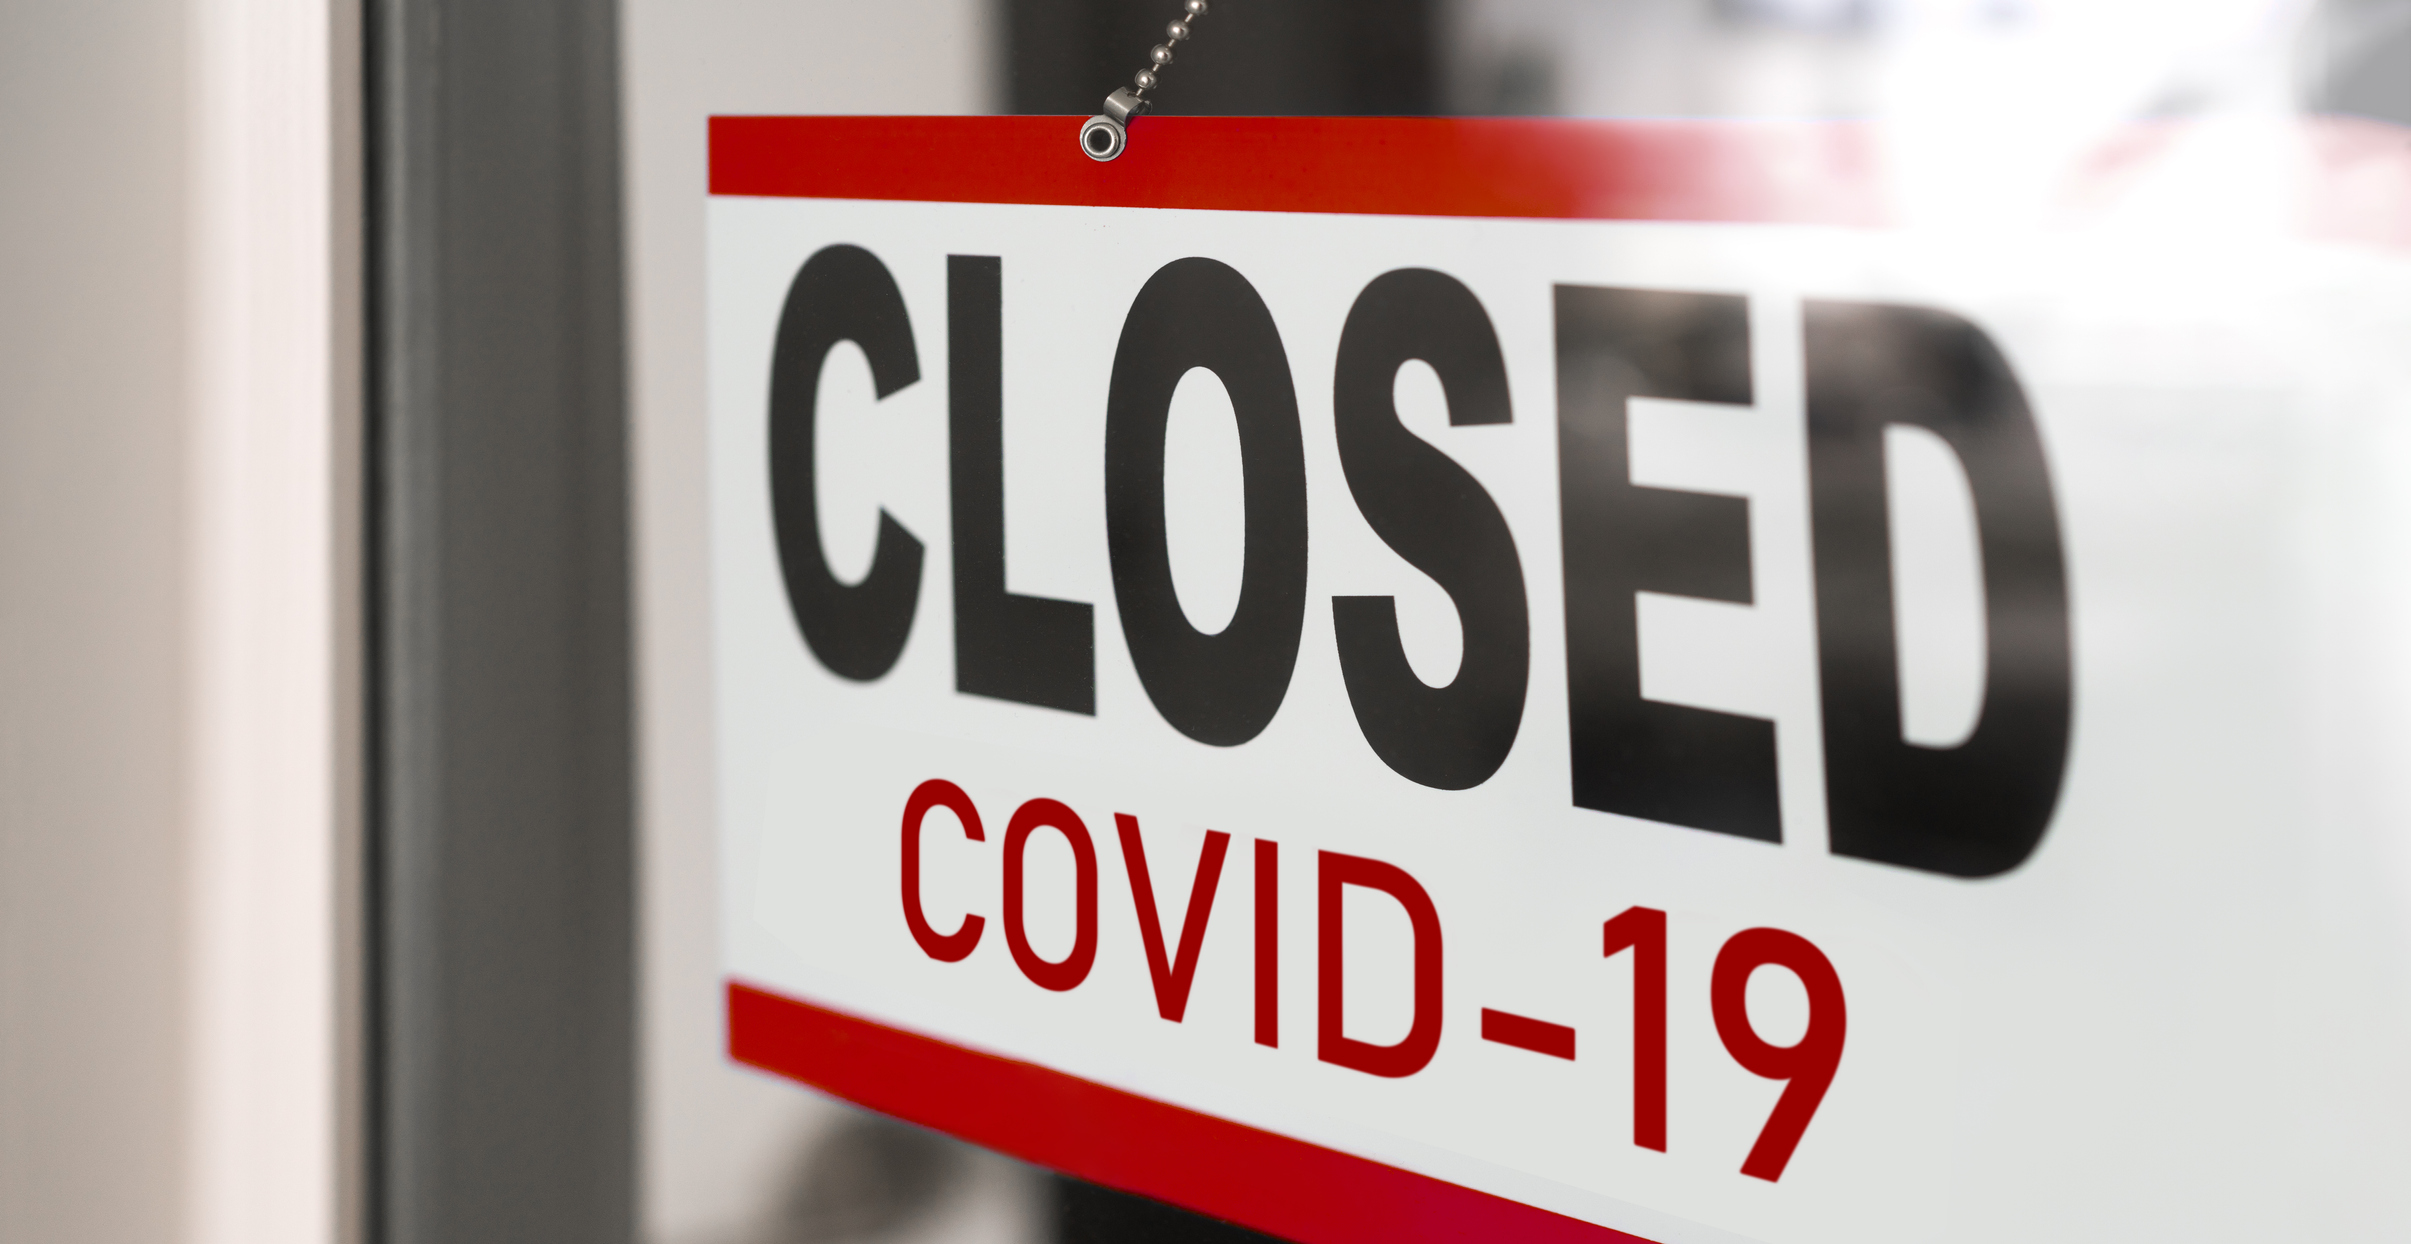 Closed due to COVID sign